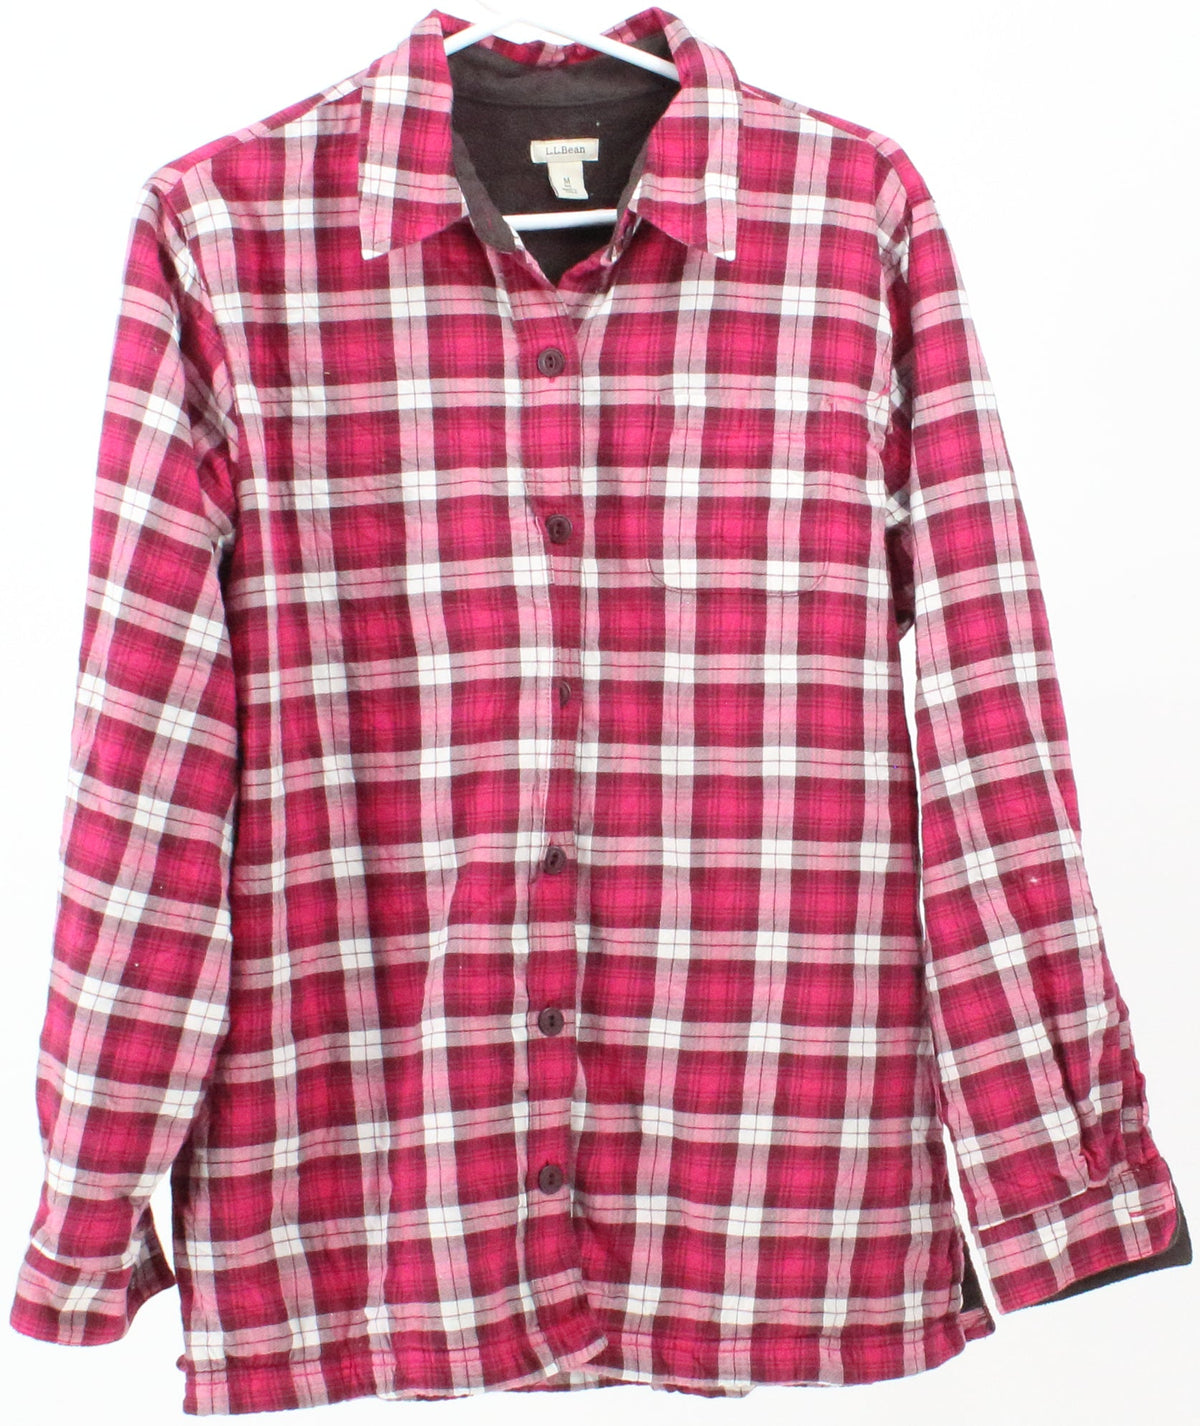 L.L.Bean Pink and White Plaid Shirt With Fleece Lining